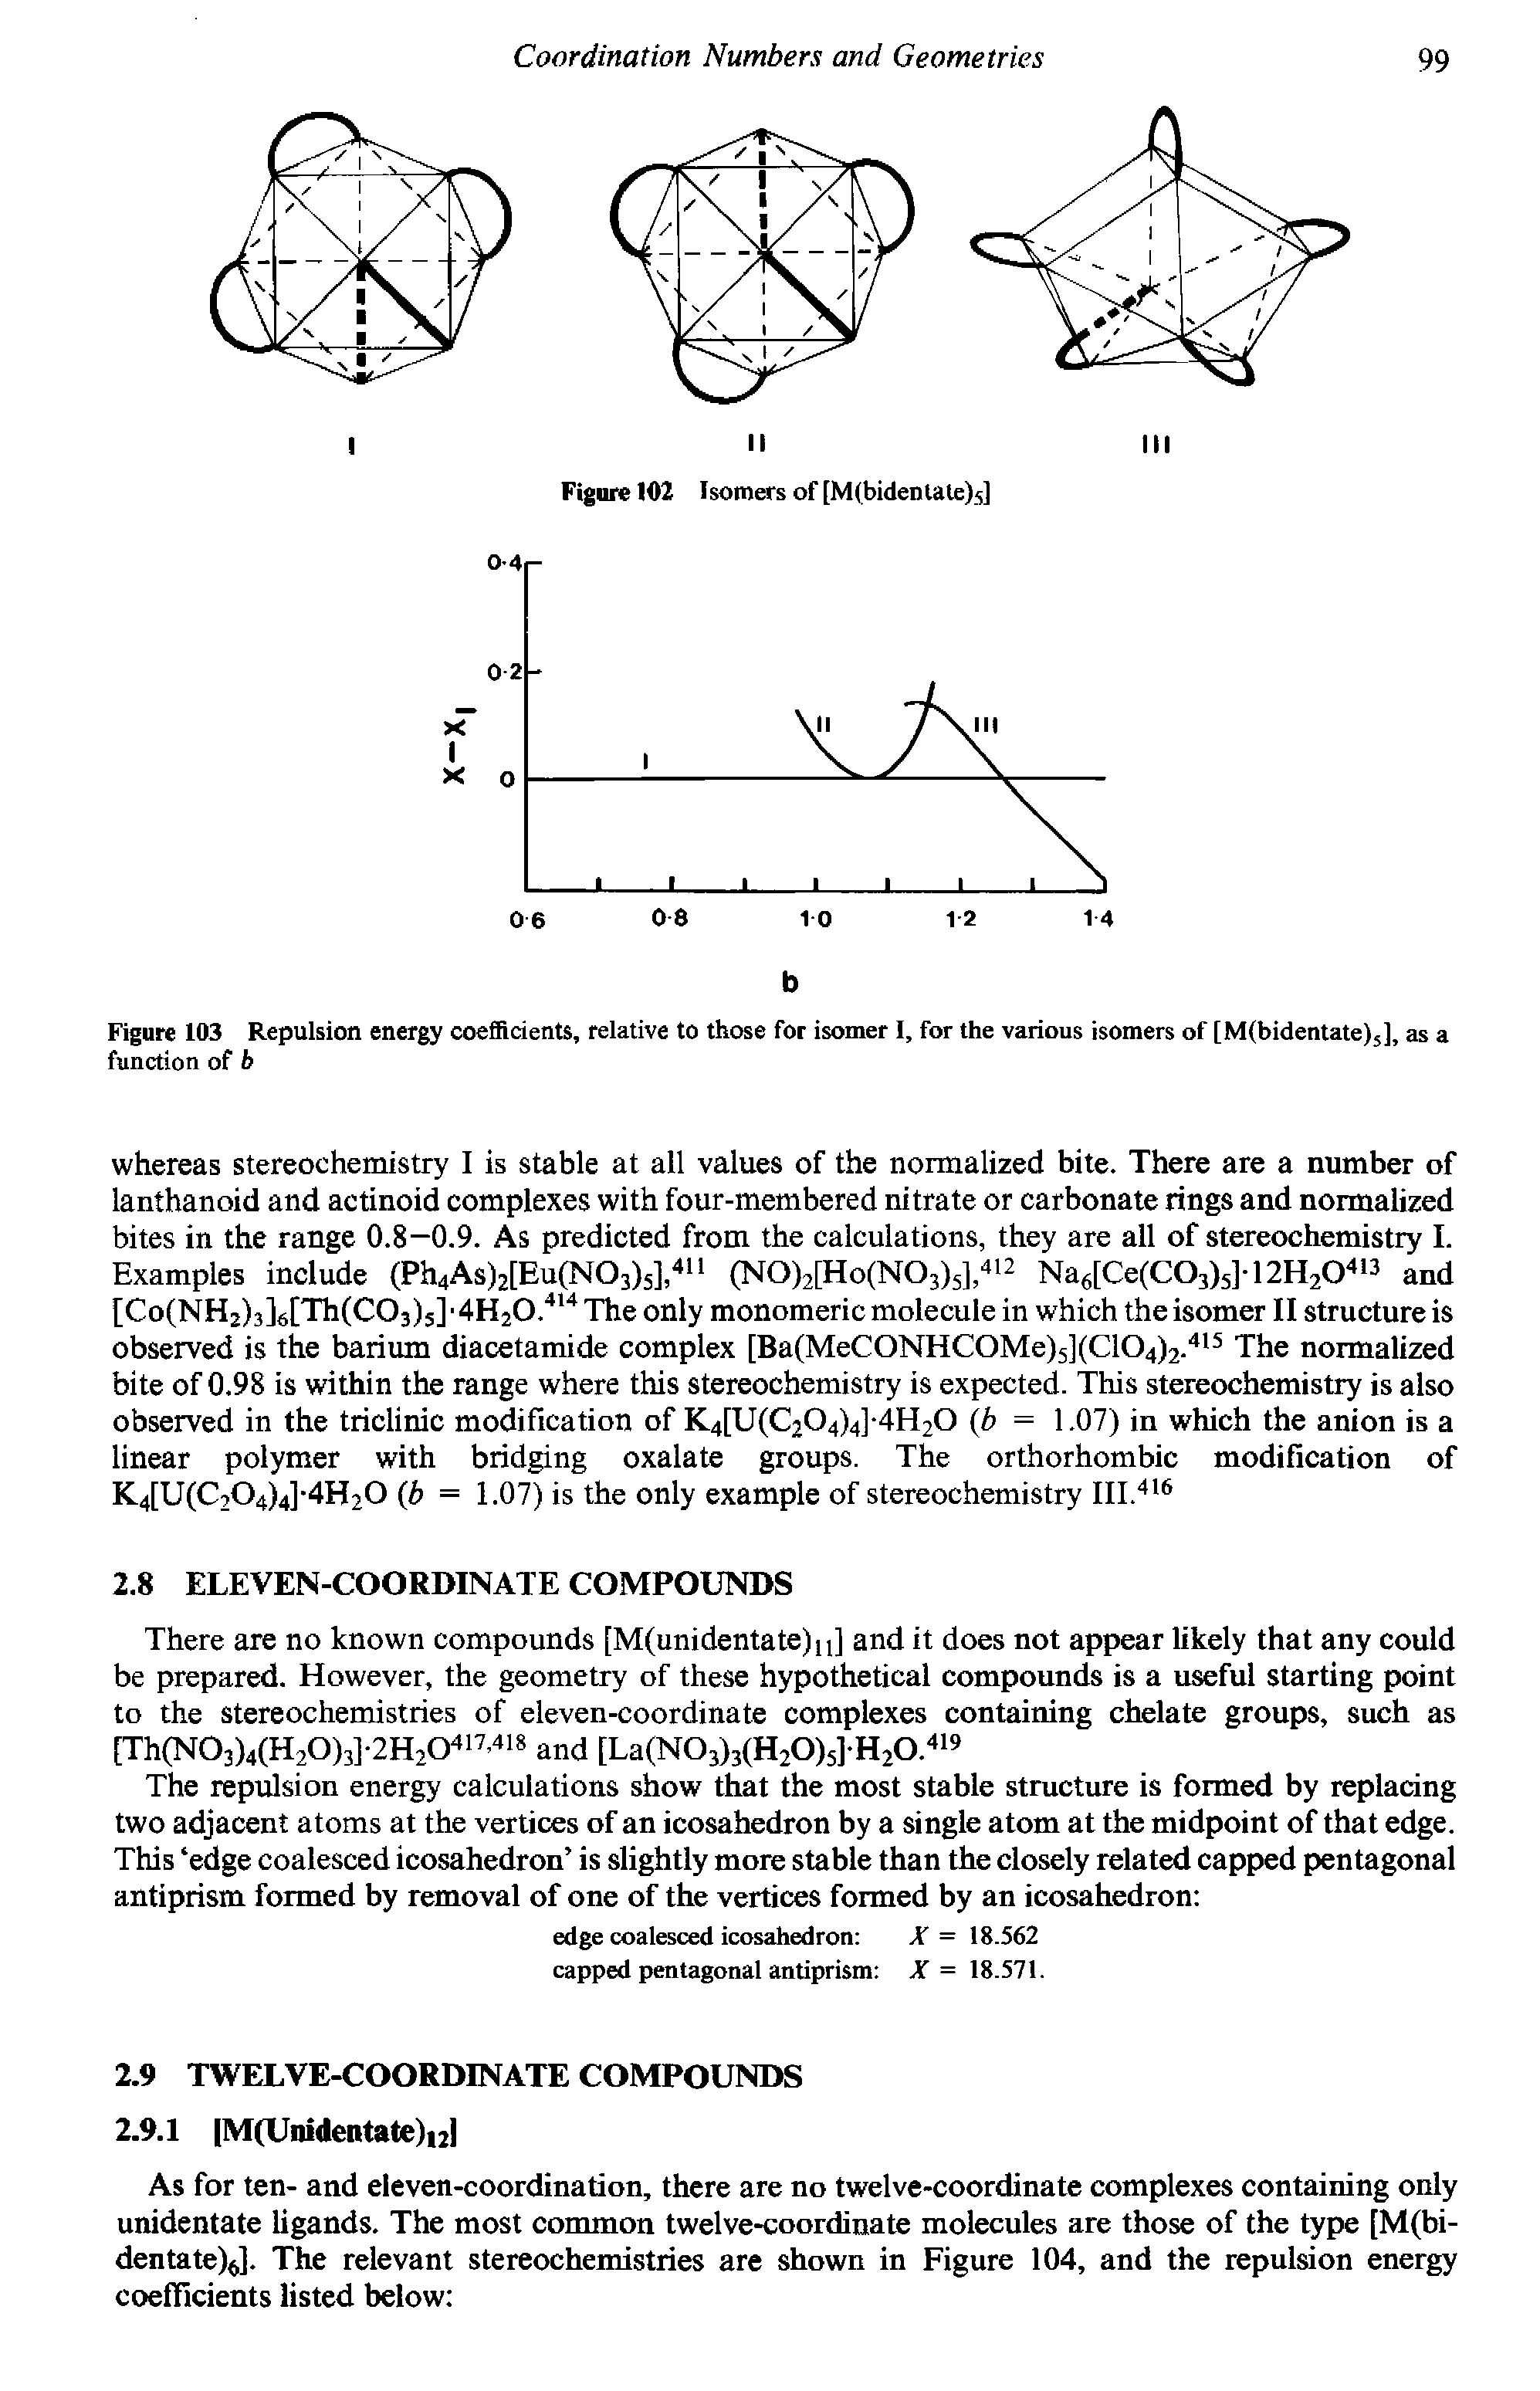 Figure 103 Repulsion energy coefficients, relative to those for isomer I, for the various isomers of [M(bidentate)5], as a function of b...